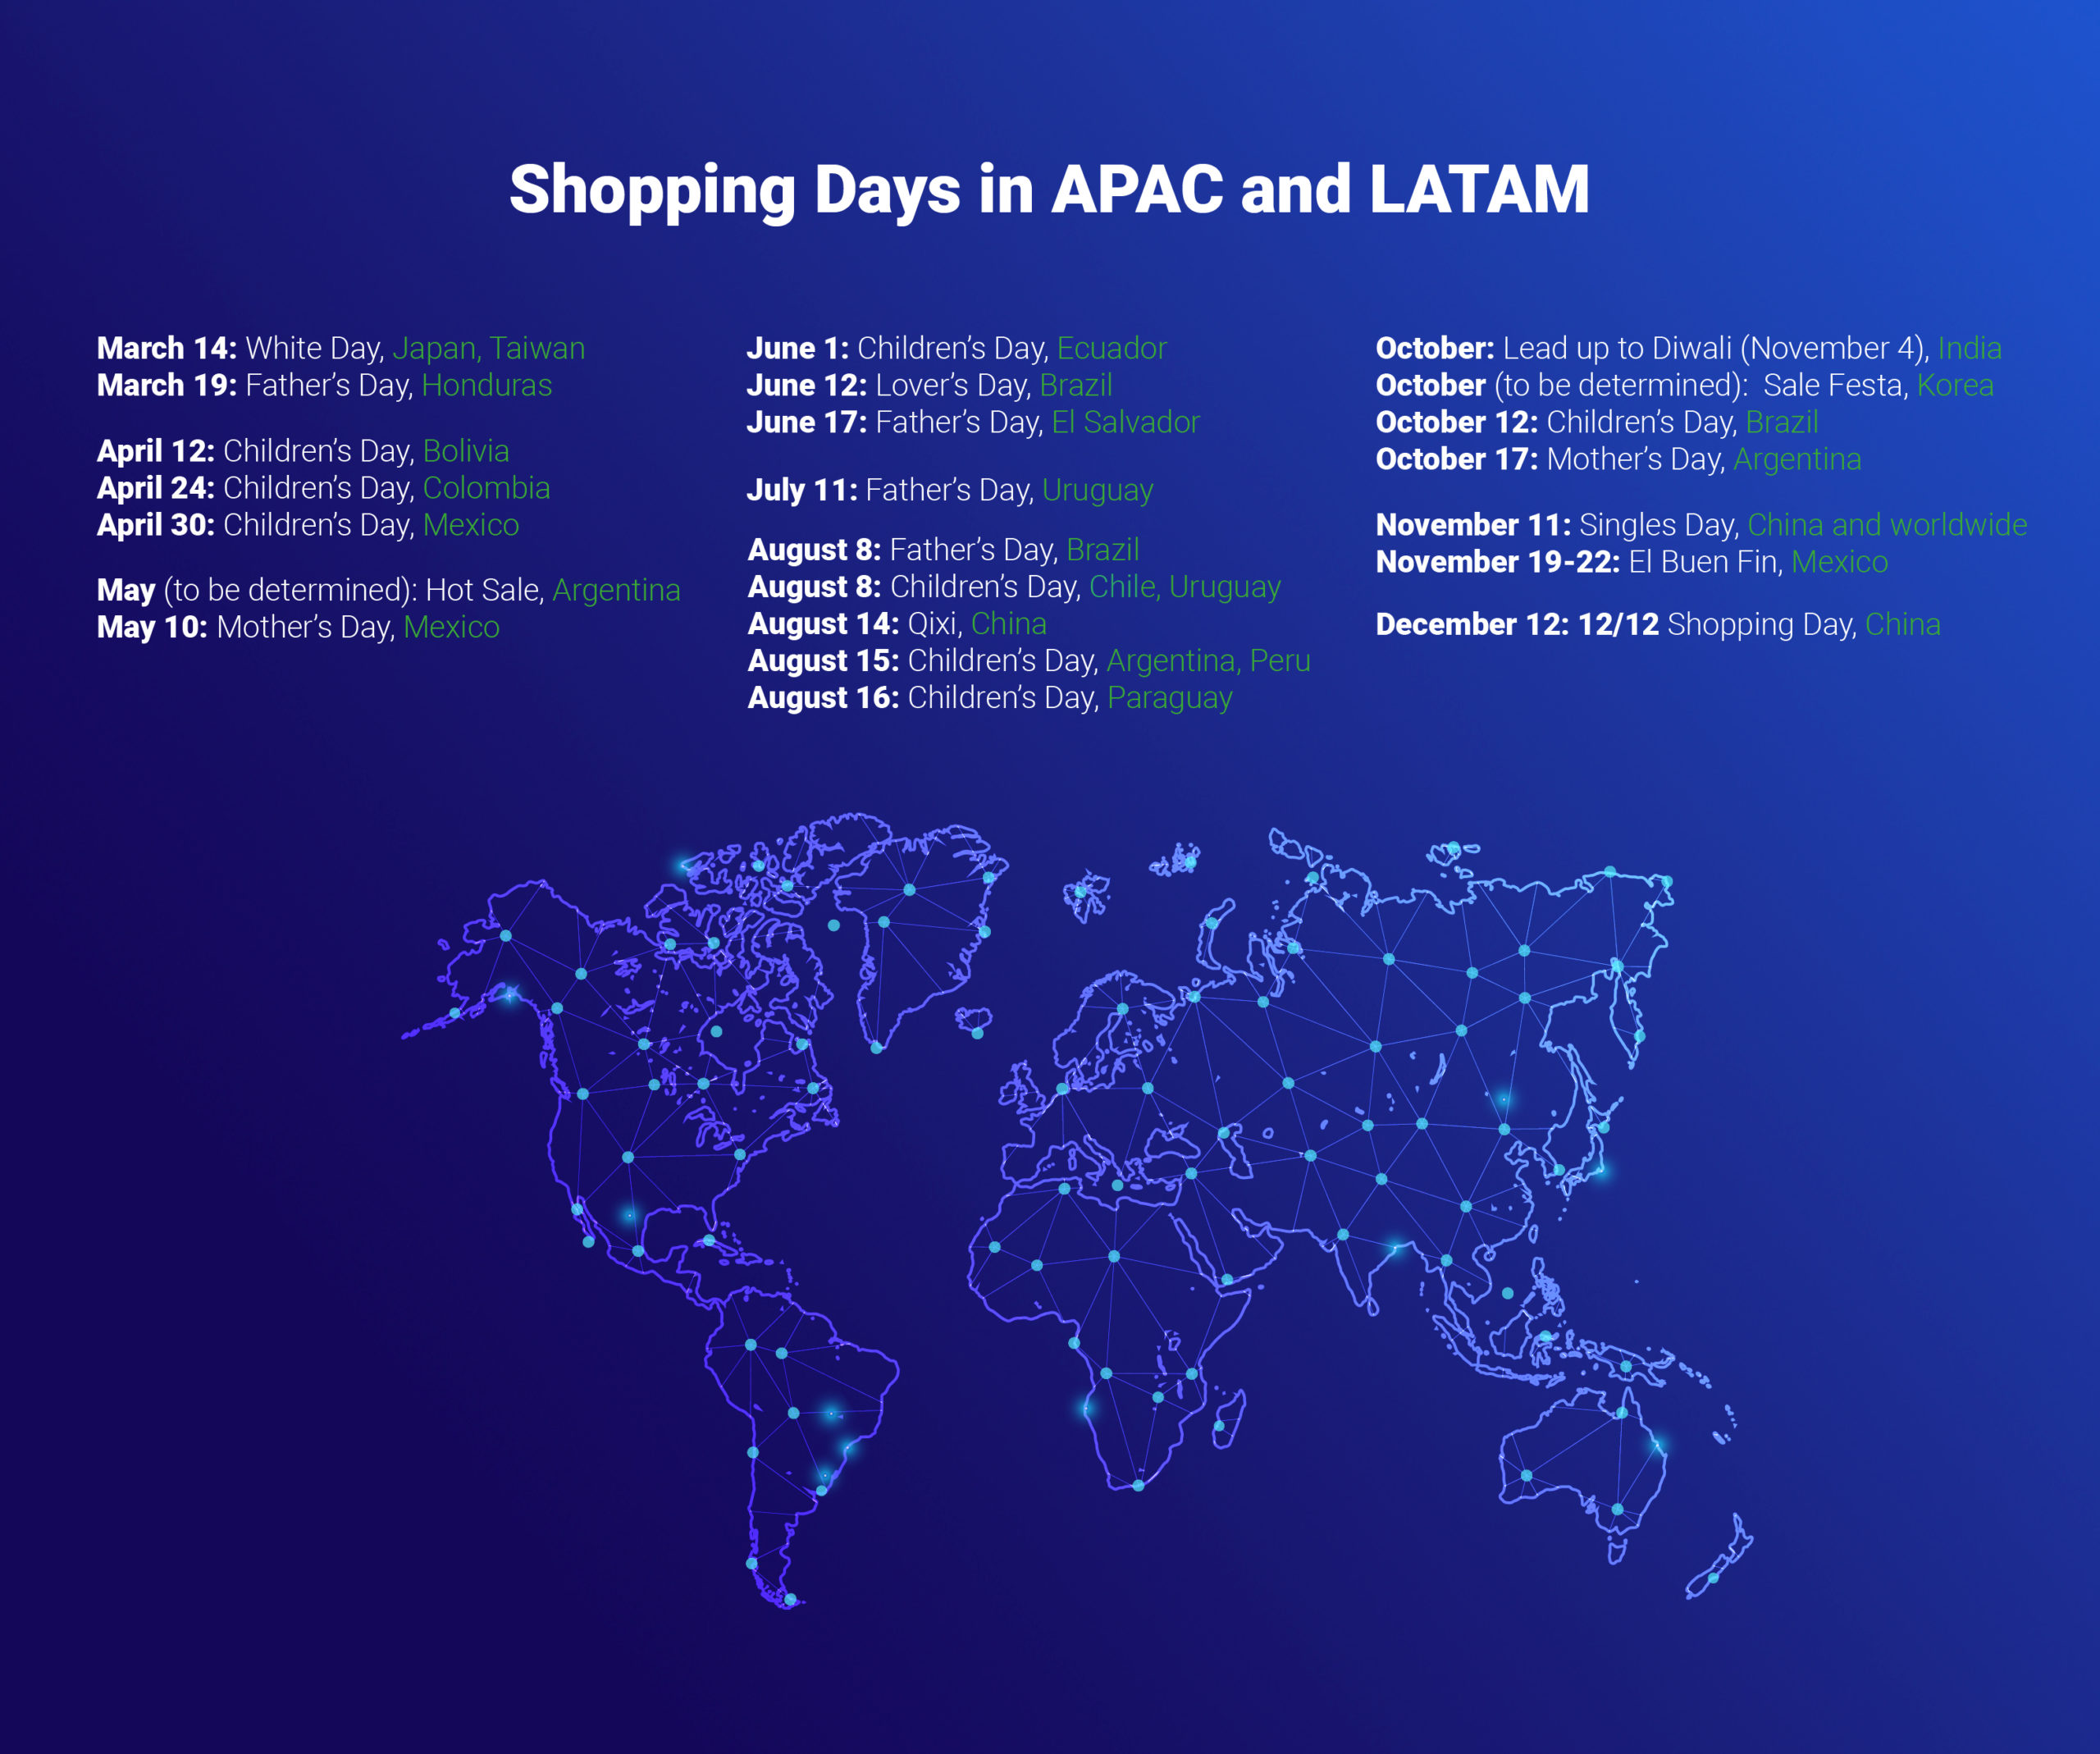 Shopping days in APAC and LATAM